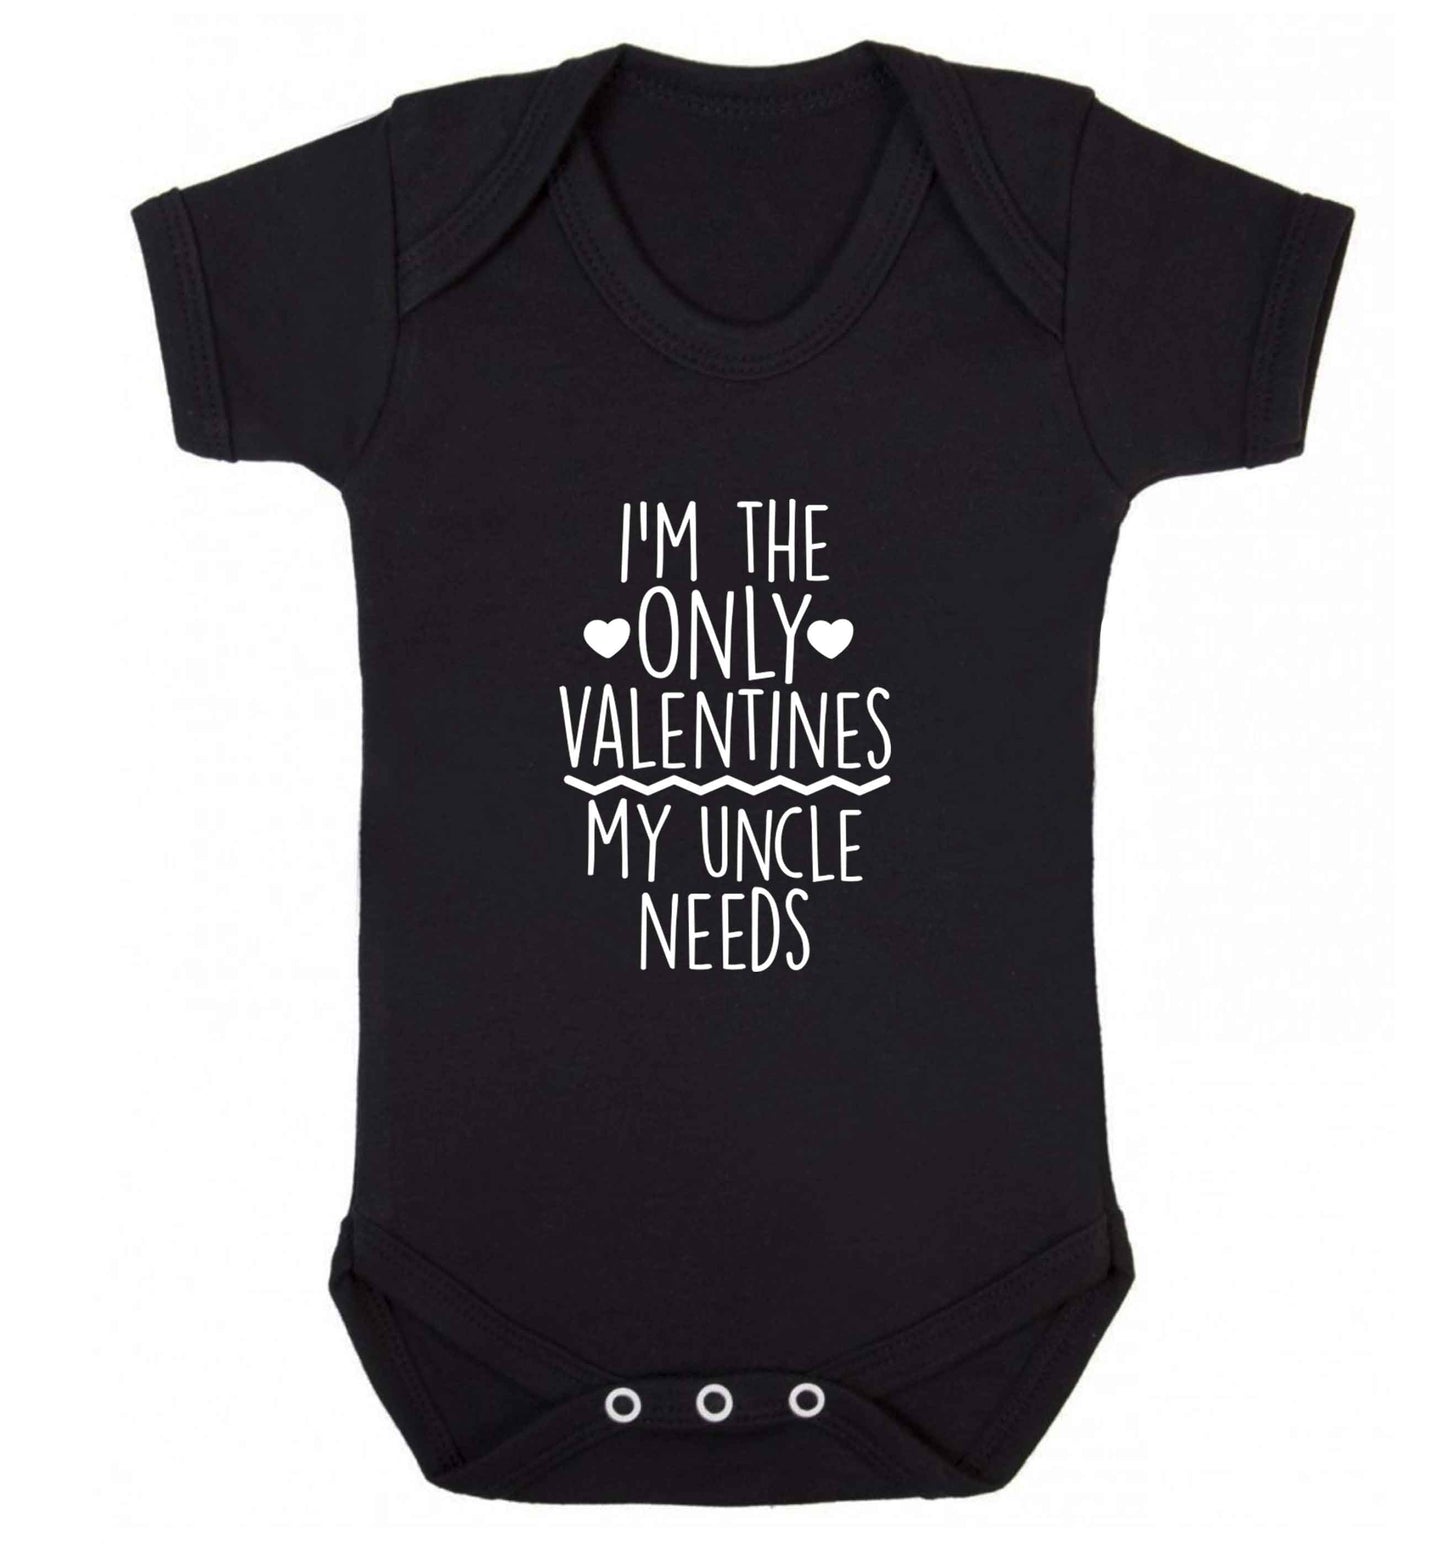 I'm the only valentines my uncle needs baby vest black 18-24 months